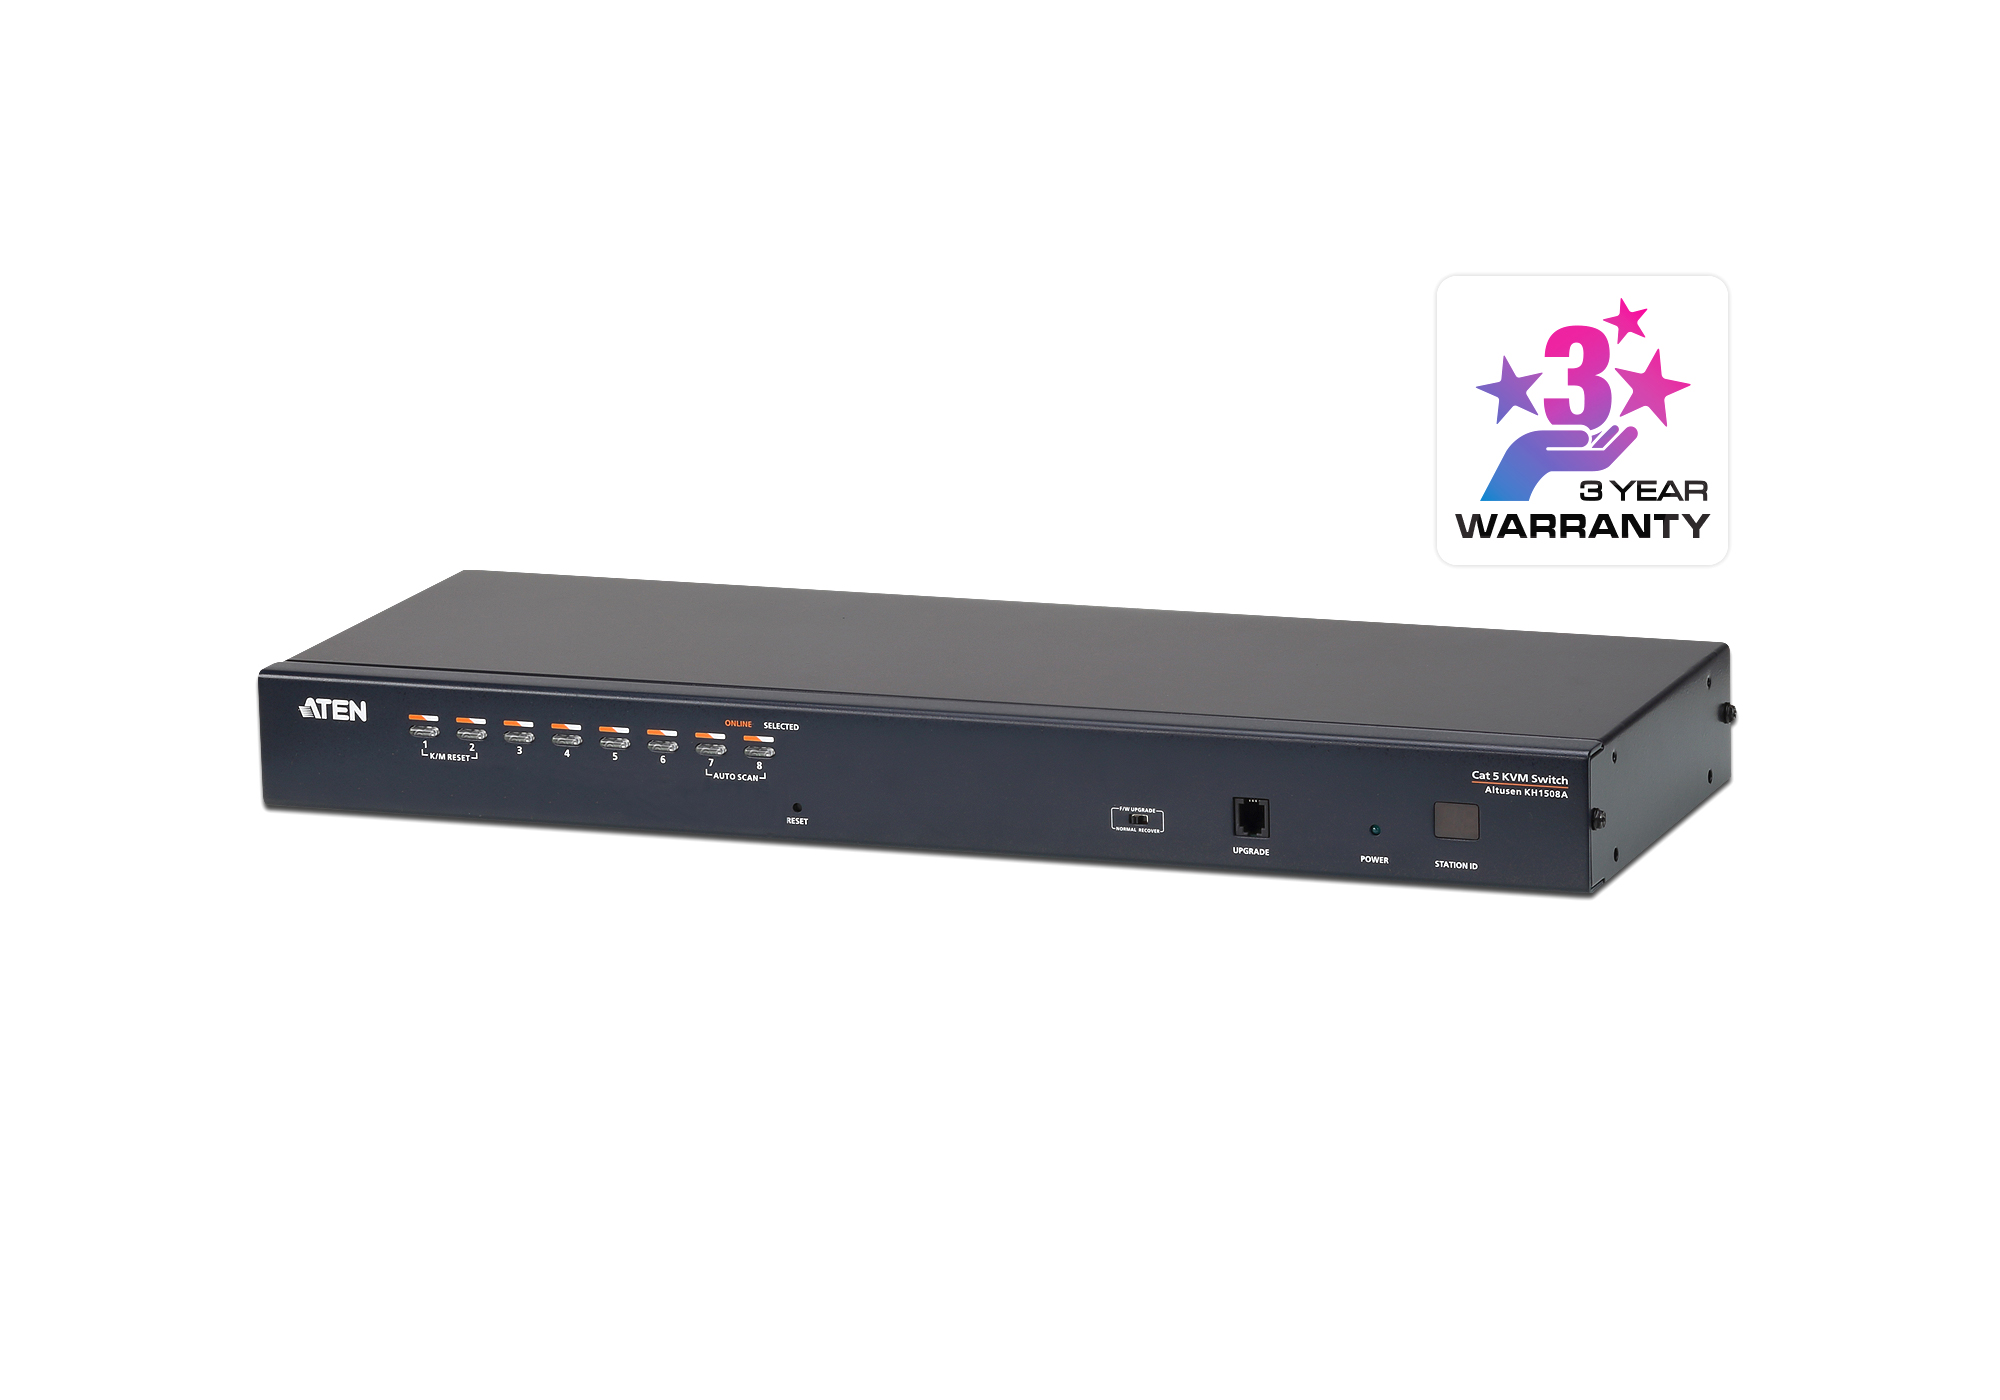 You Recently Viewed Aten KH1508A 1x8 Port CAT-5 High Density KVM Switch Image